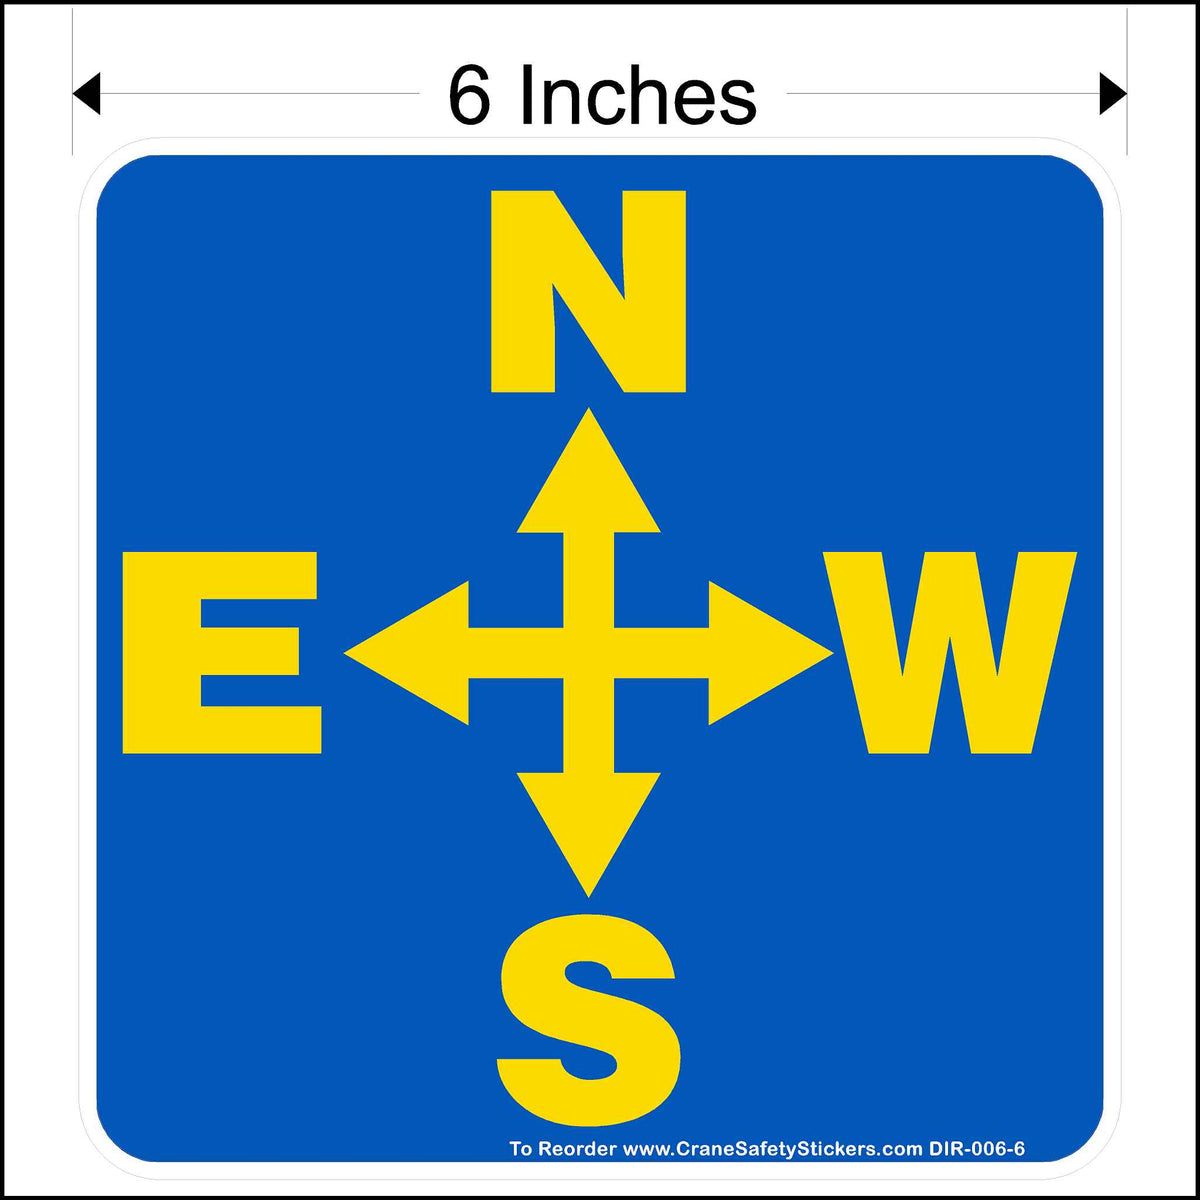 Six inch overhead crane directional decal, printed in blue with yellow north, south, west, and east.